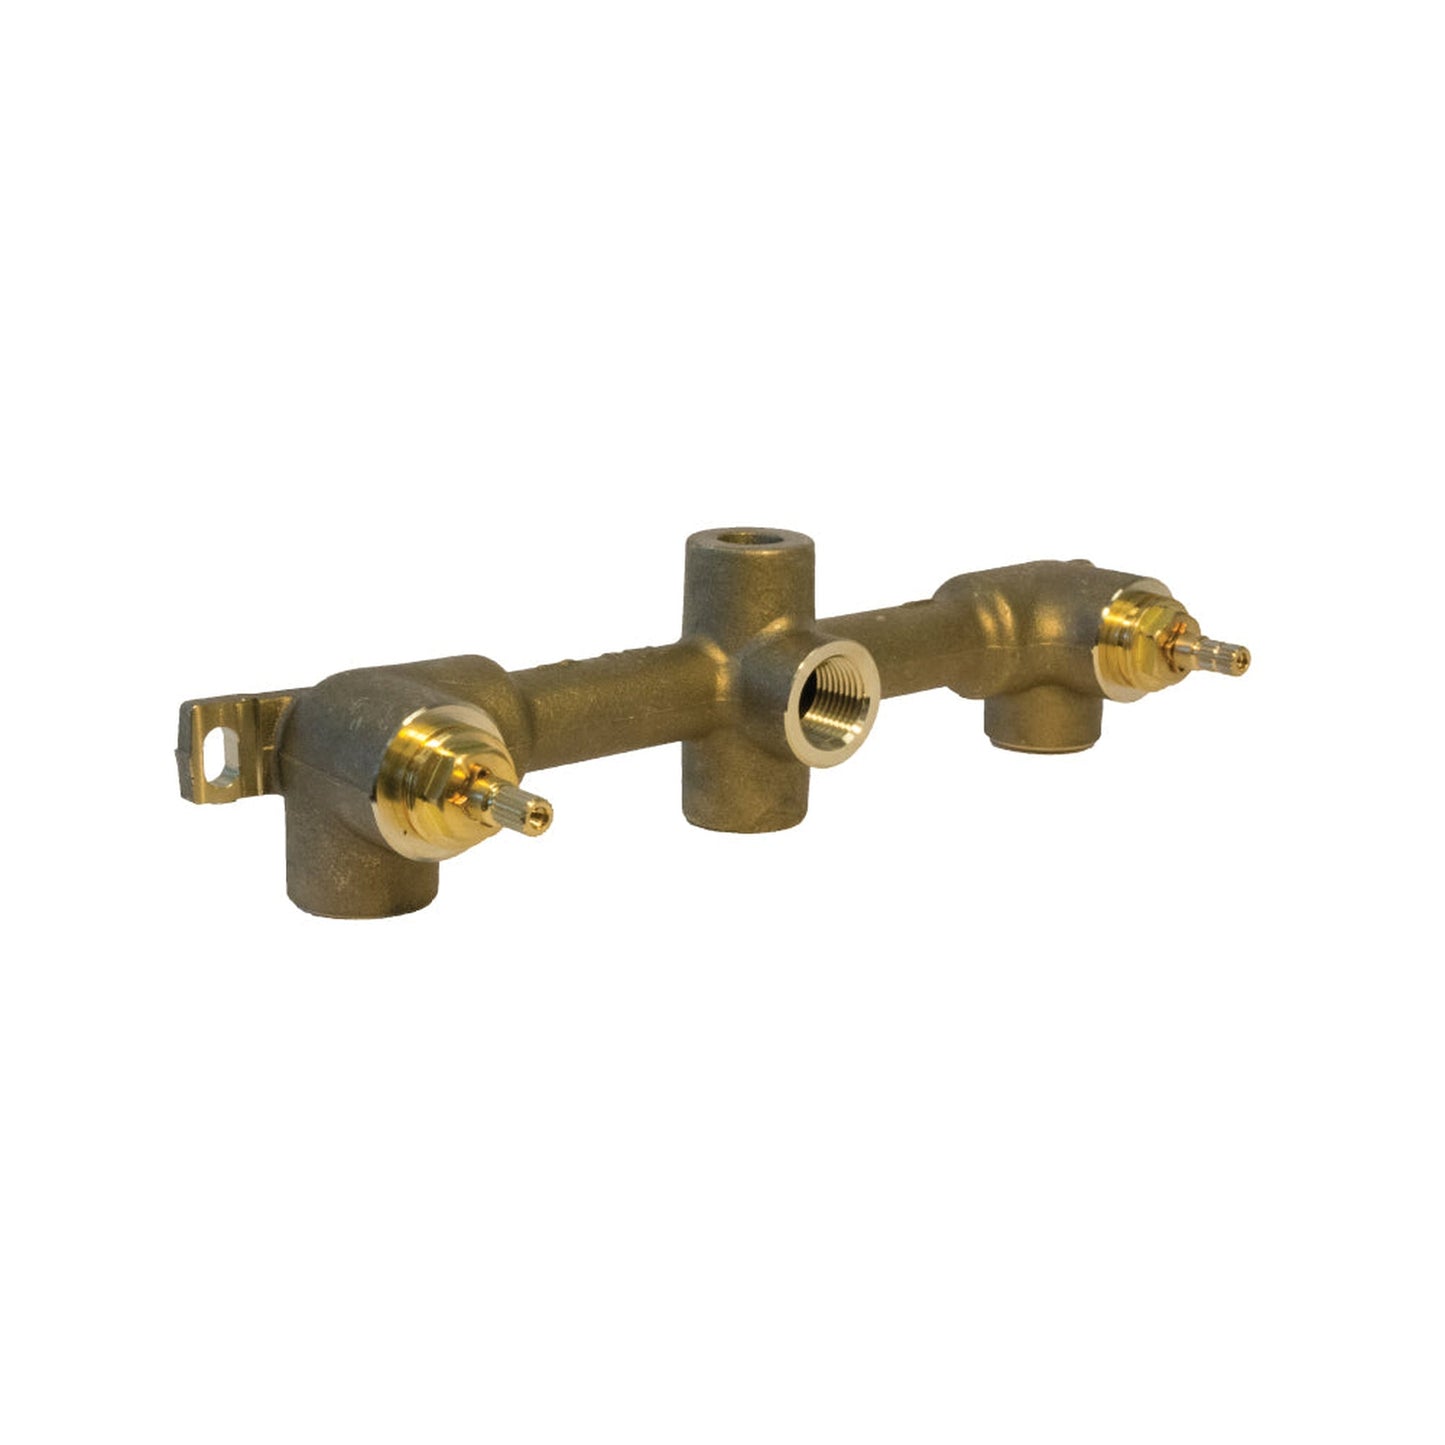 Isenberg Serie 100 8" Three-Hole Satin Brass PVD Wall-Mounted Bathroom Sink Faucet With 0.50" Rough-In Valve